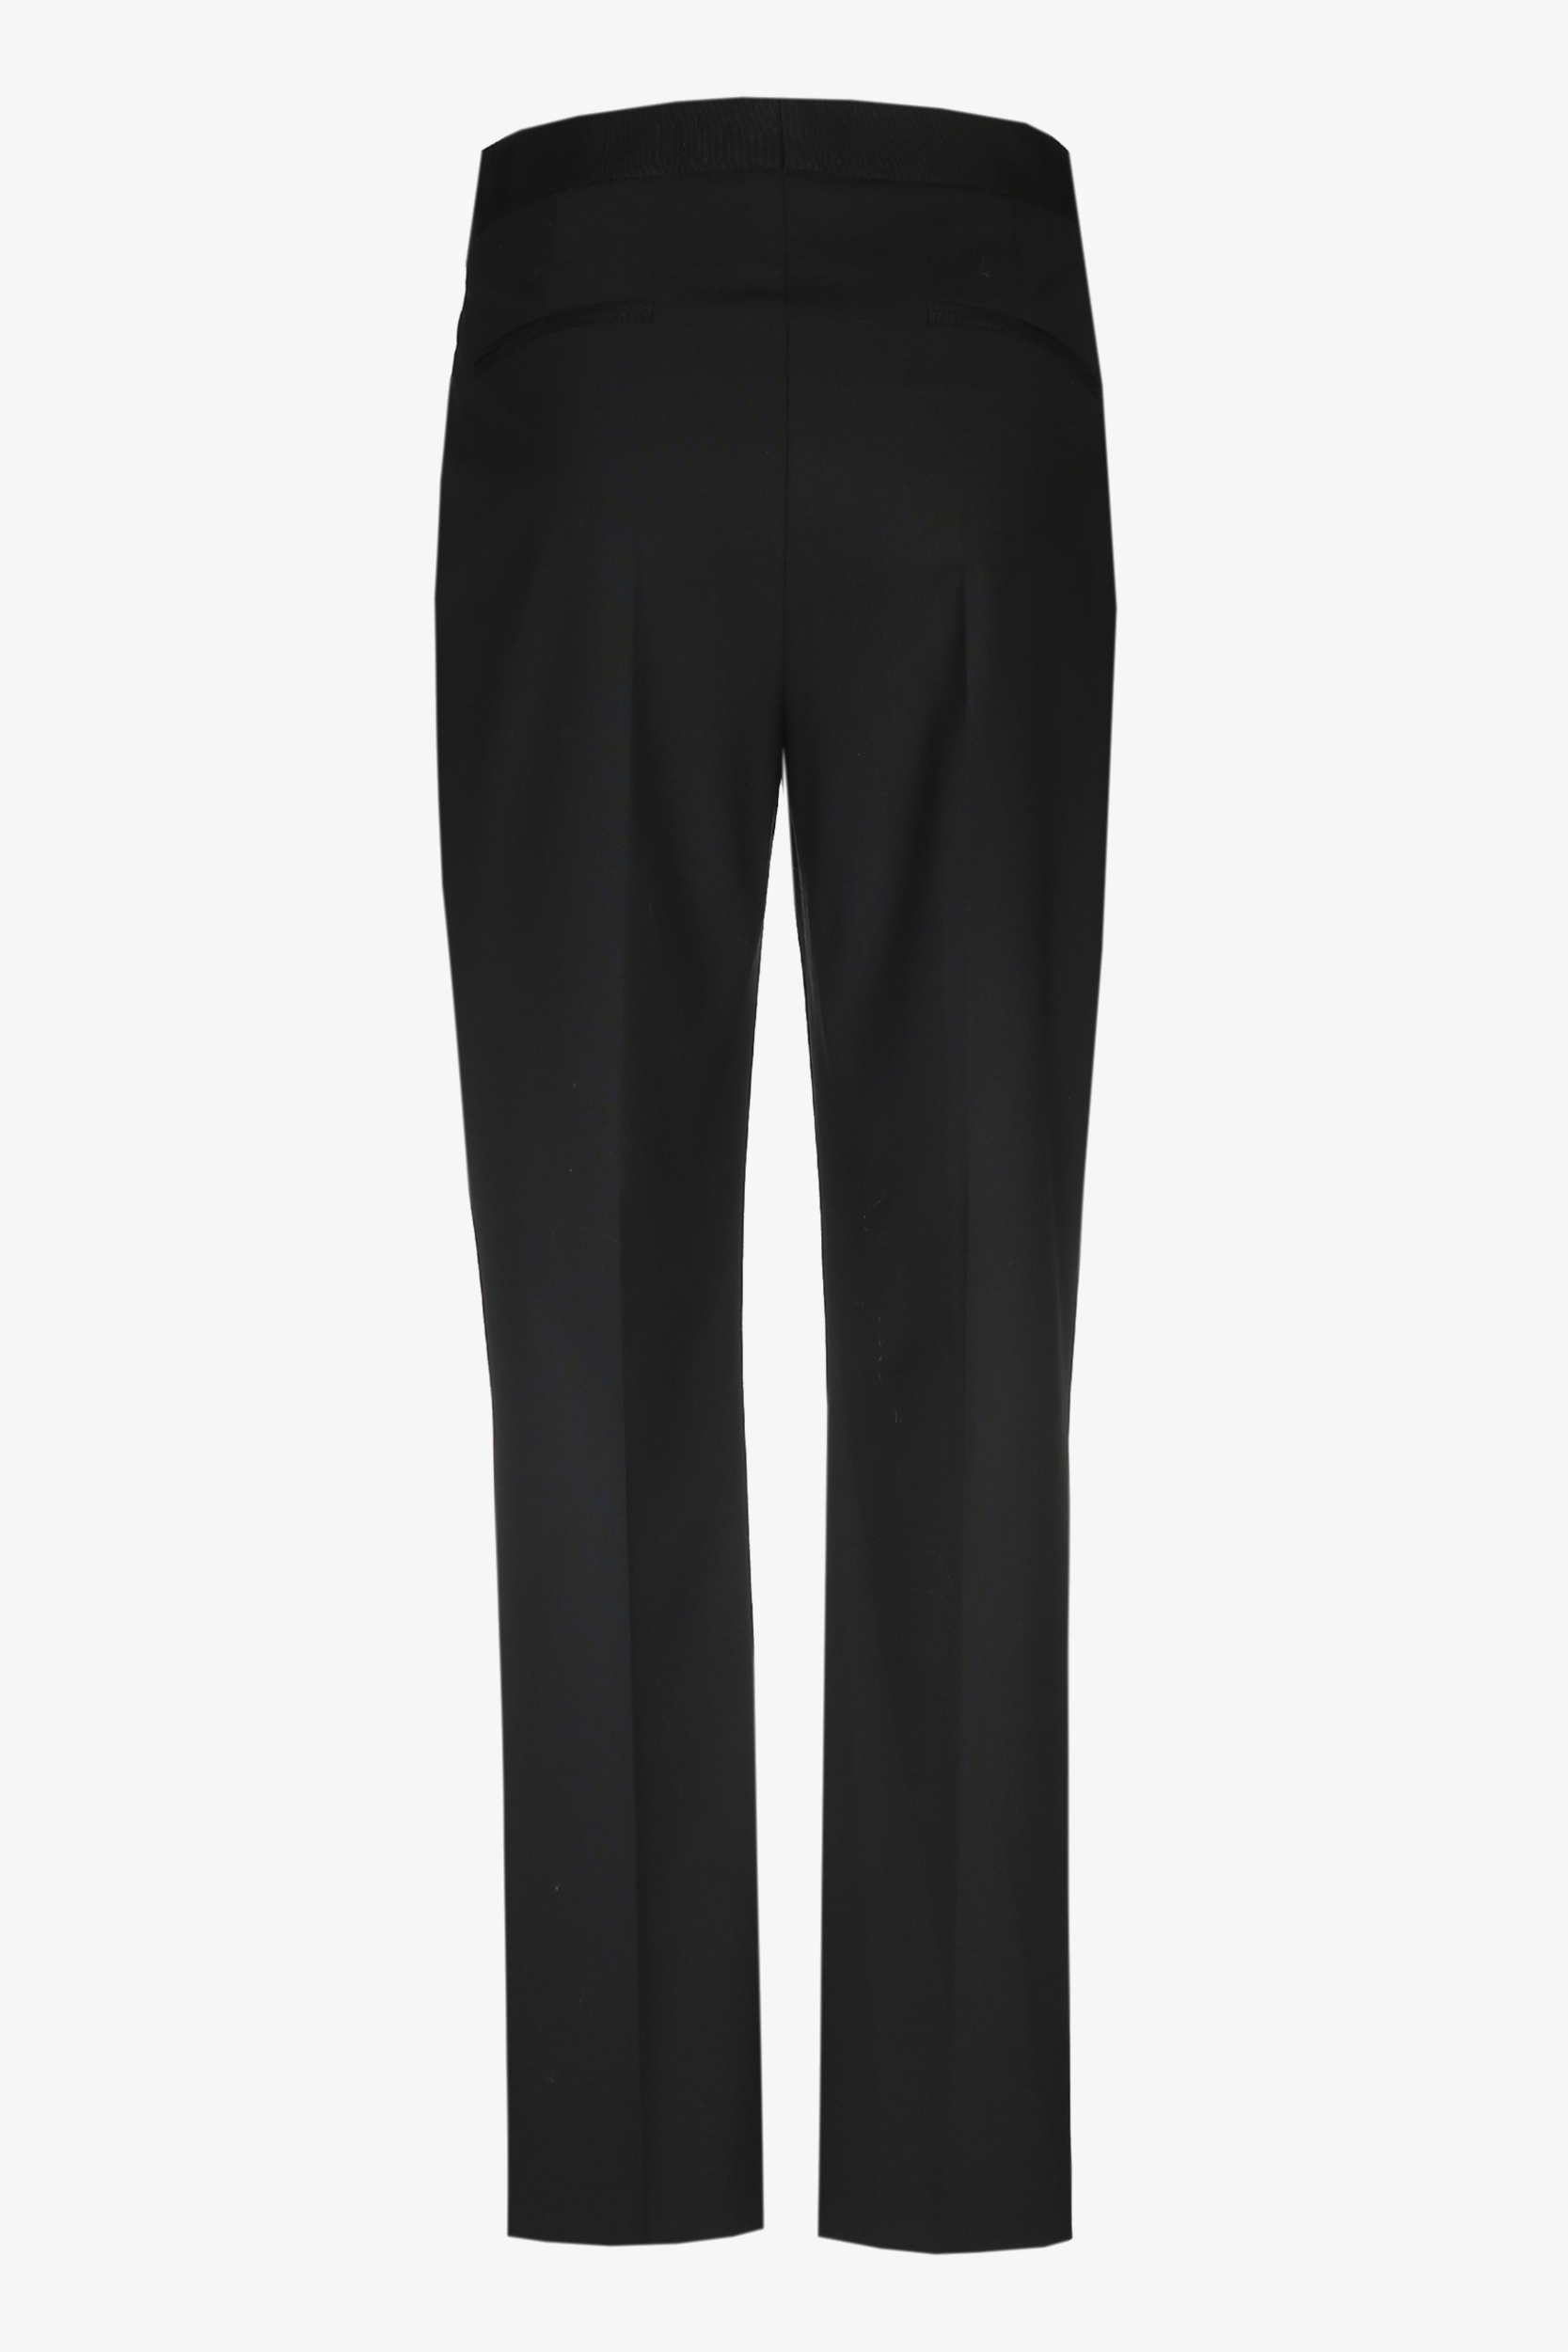 Smart tailored trousers